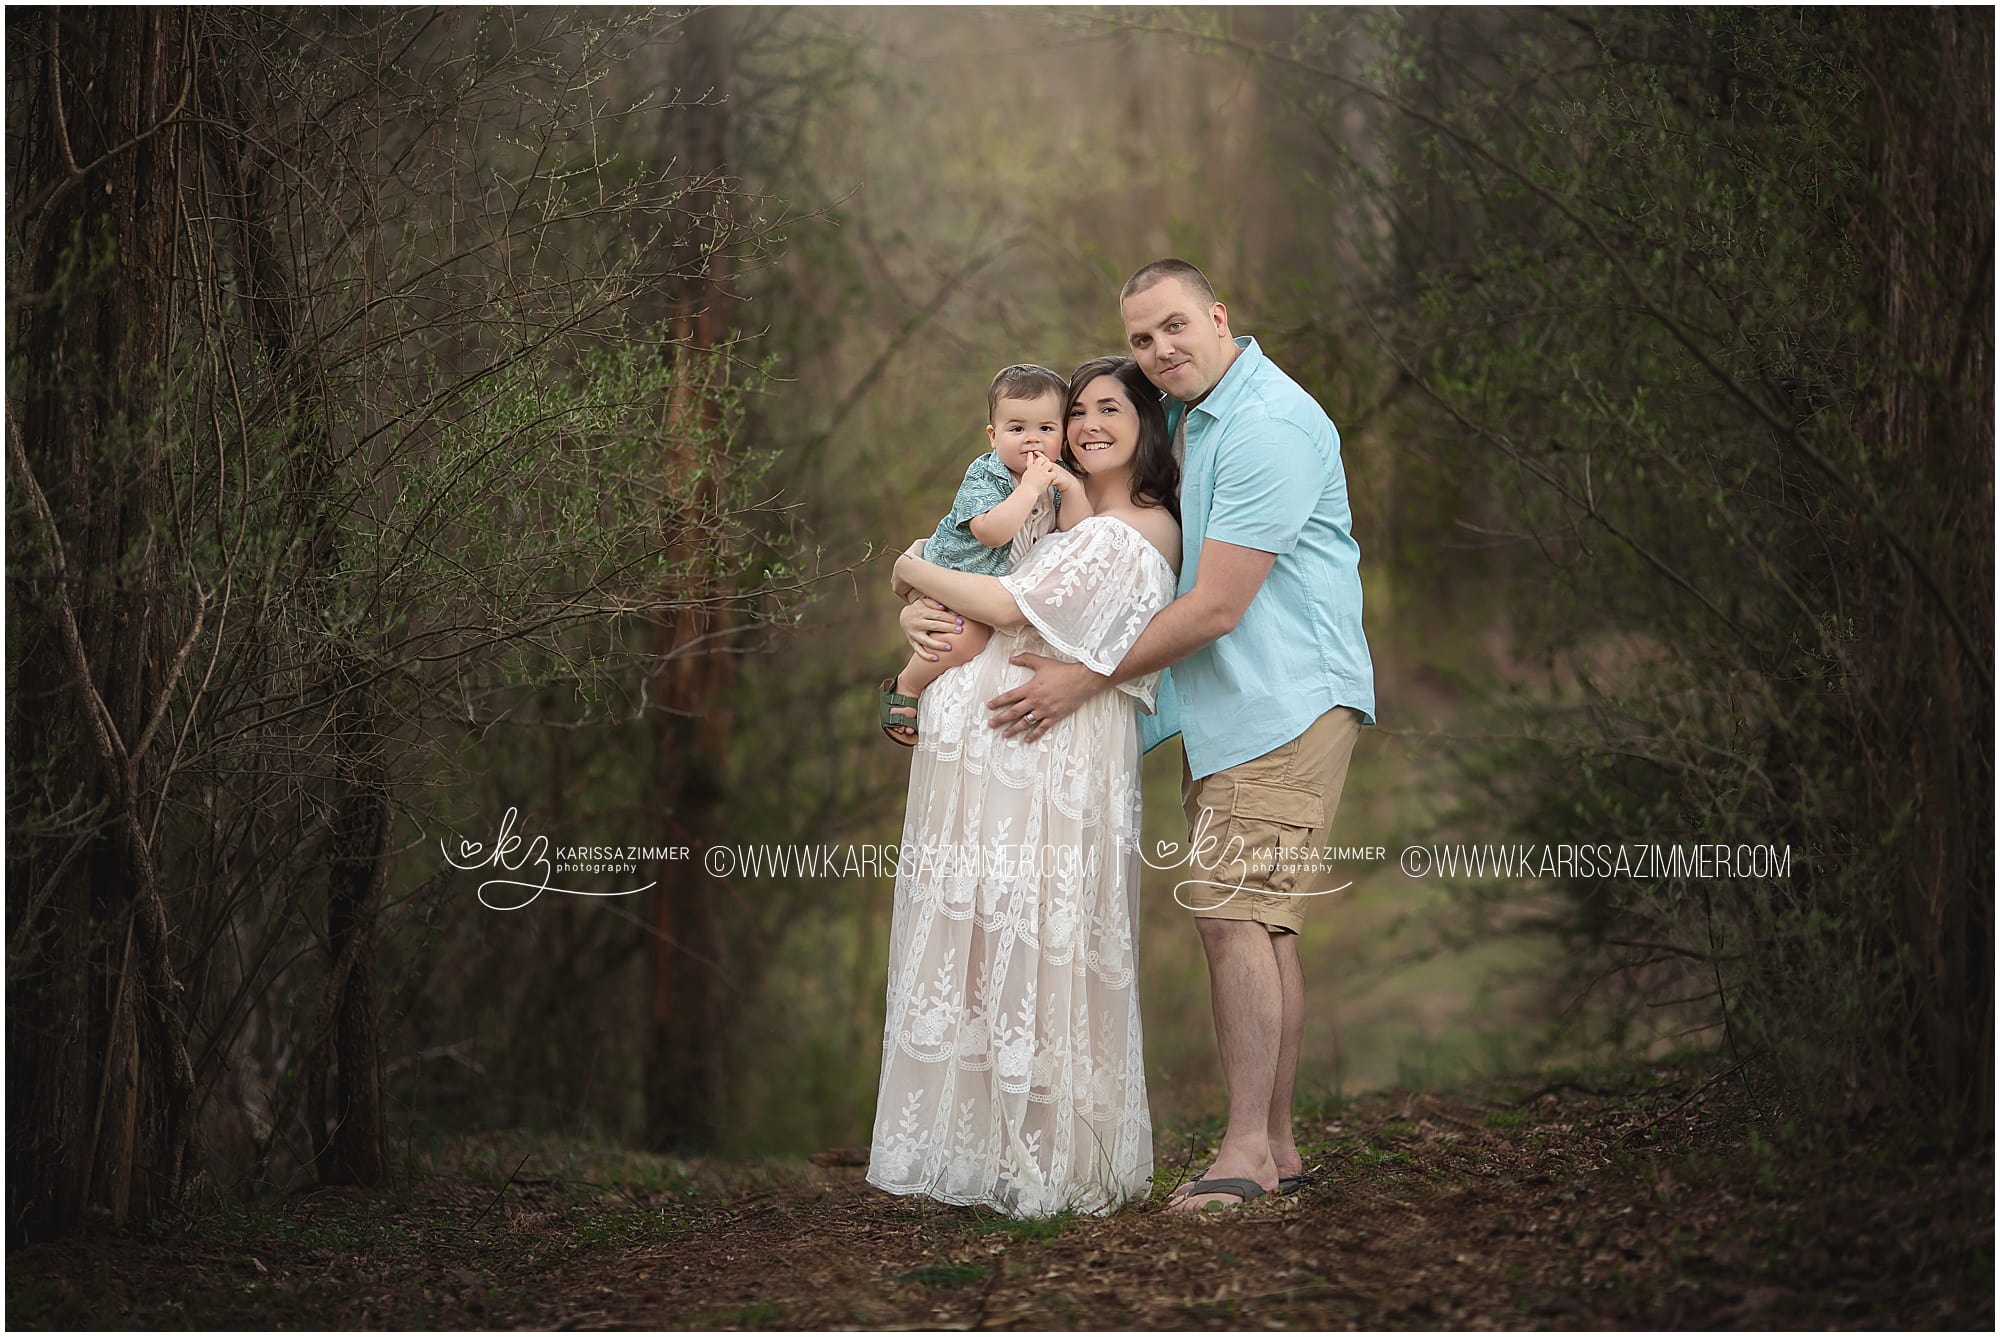 outdoor family and maternity photographer captures images of a family of 3 before they become a family of 4